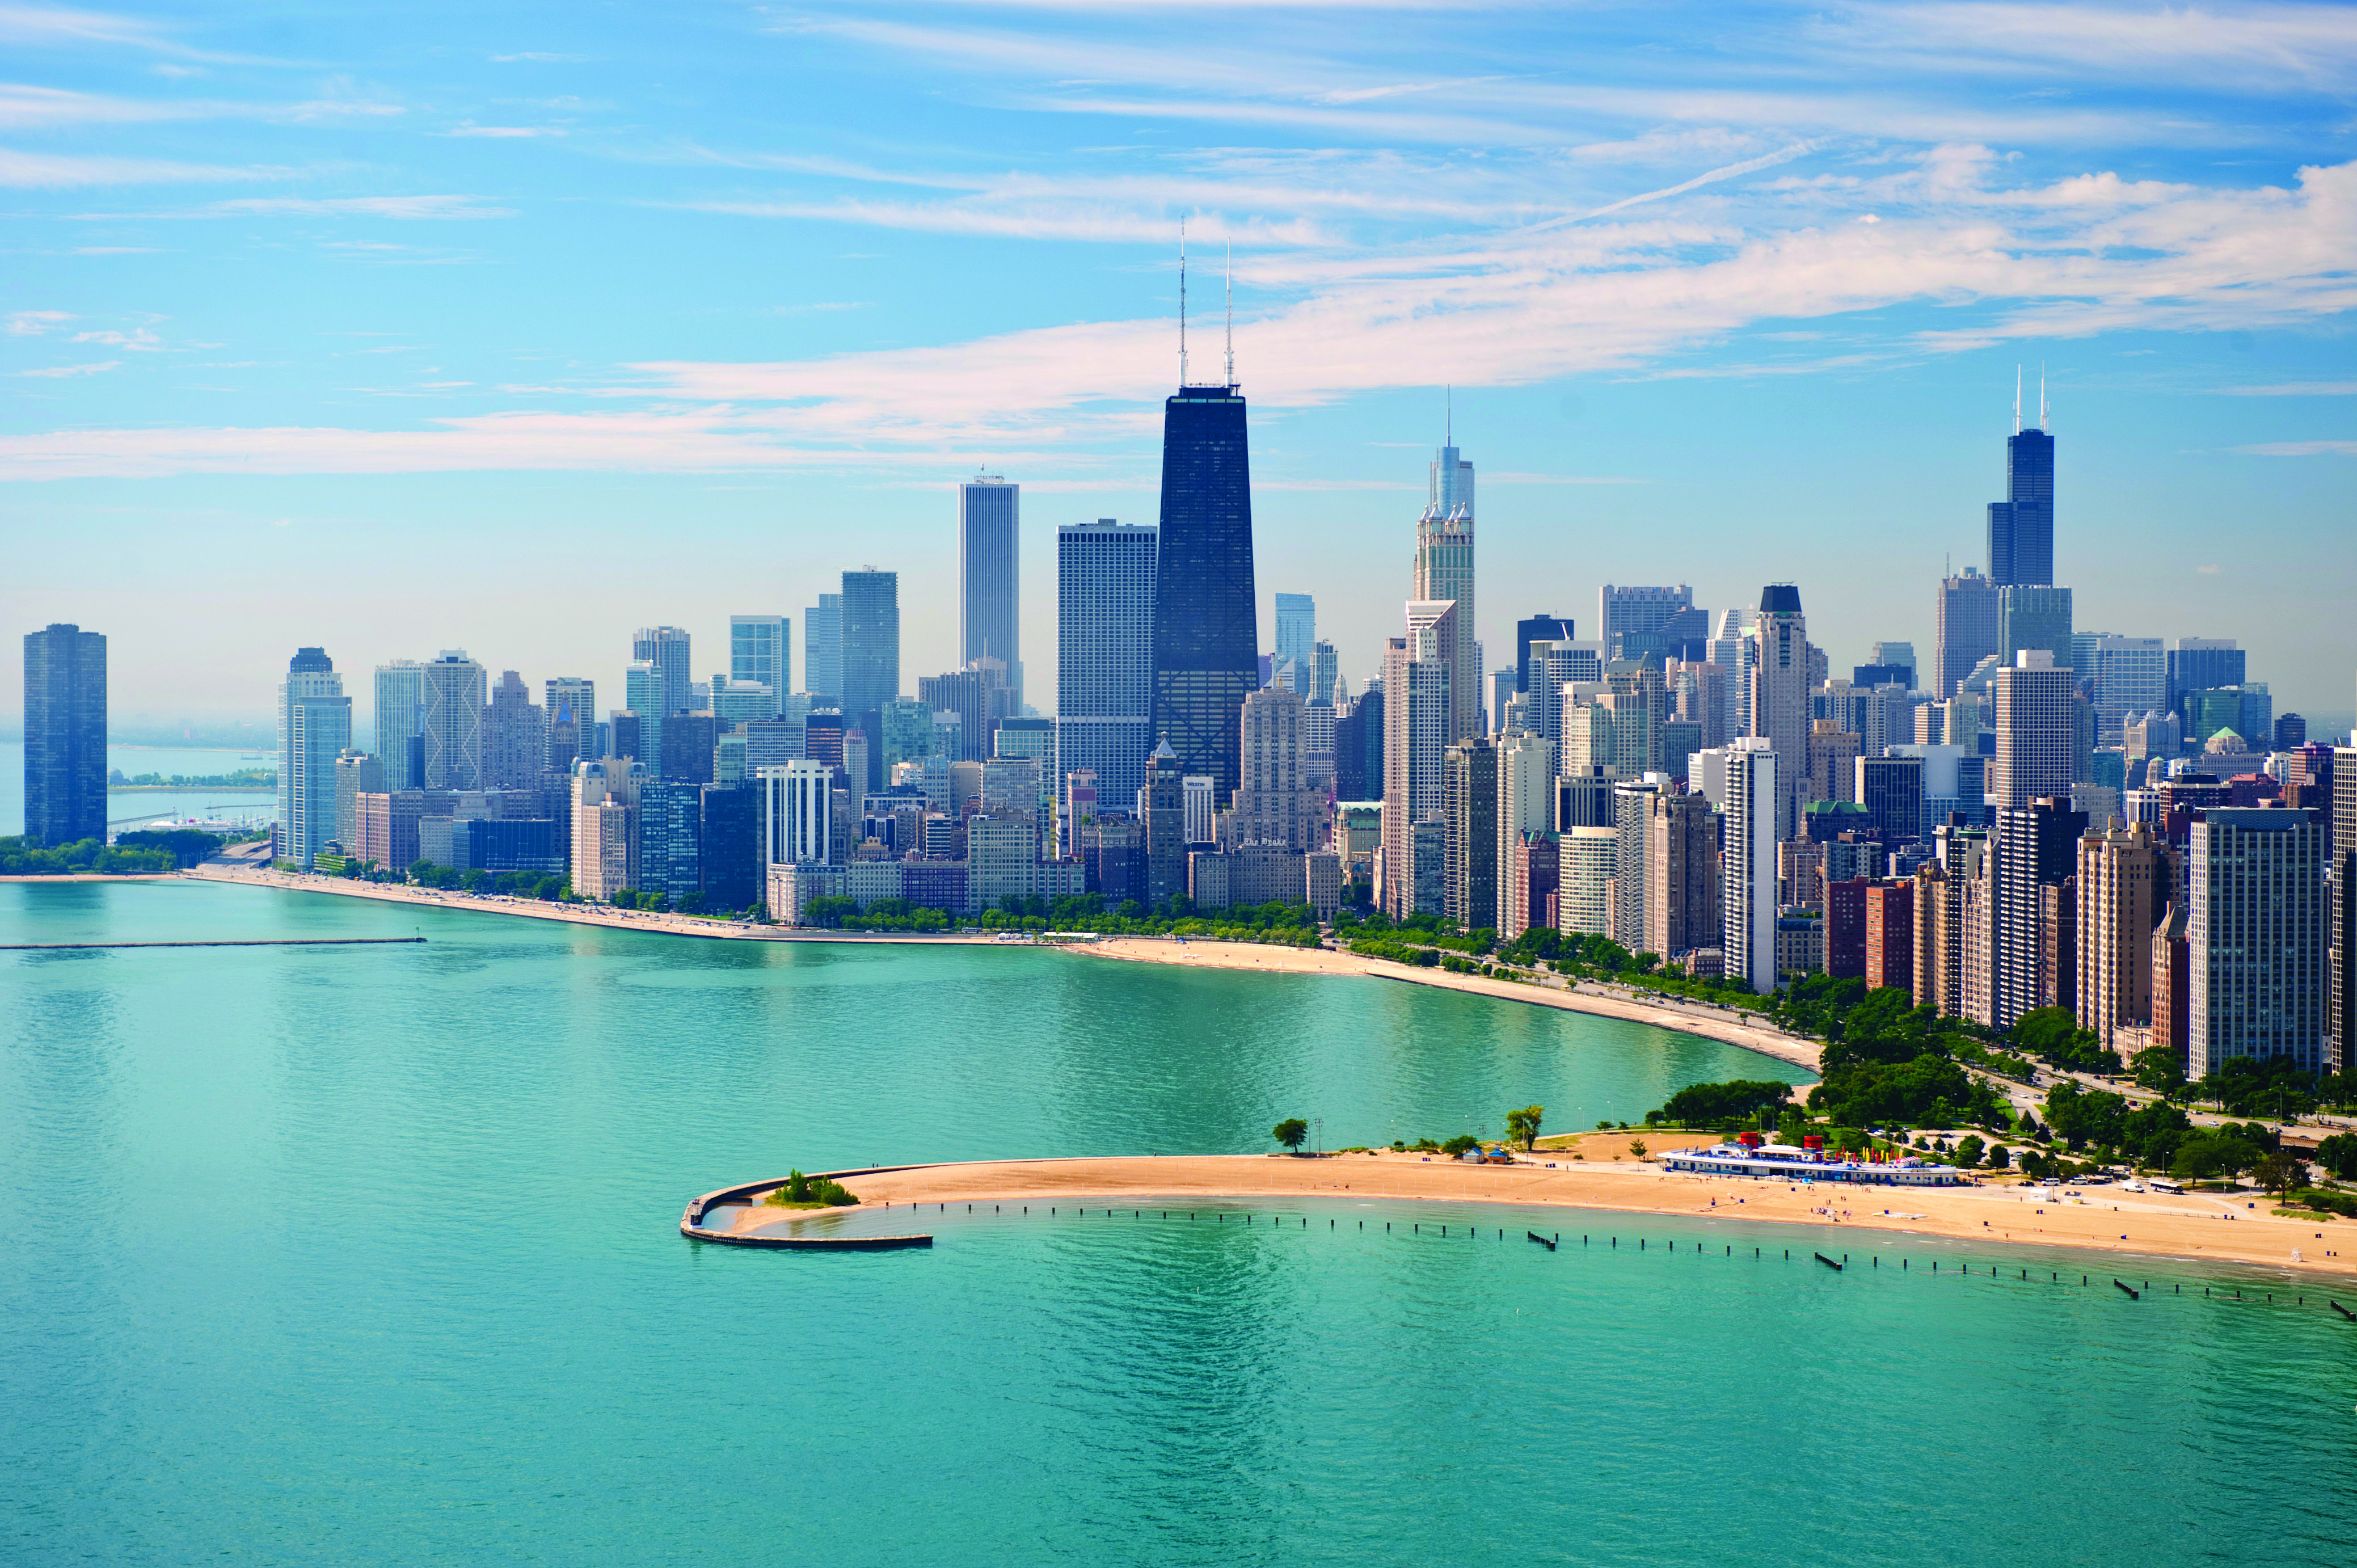 Pictures of: Chicago.